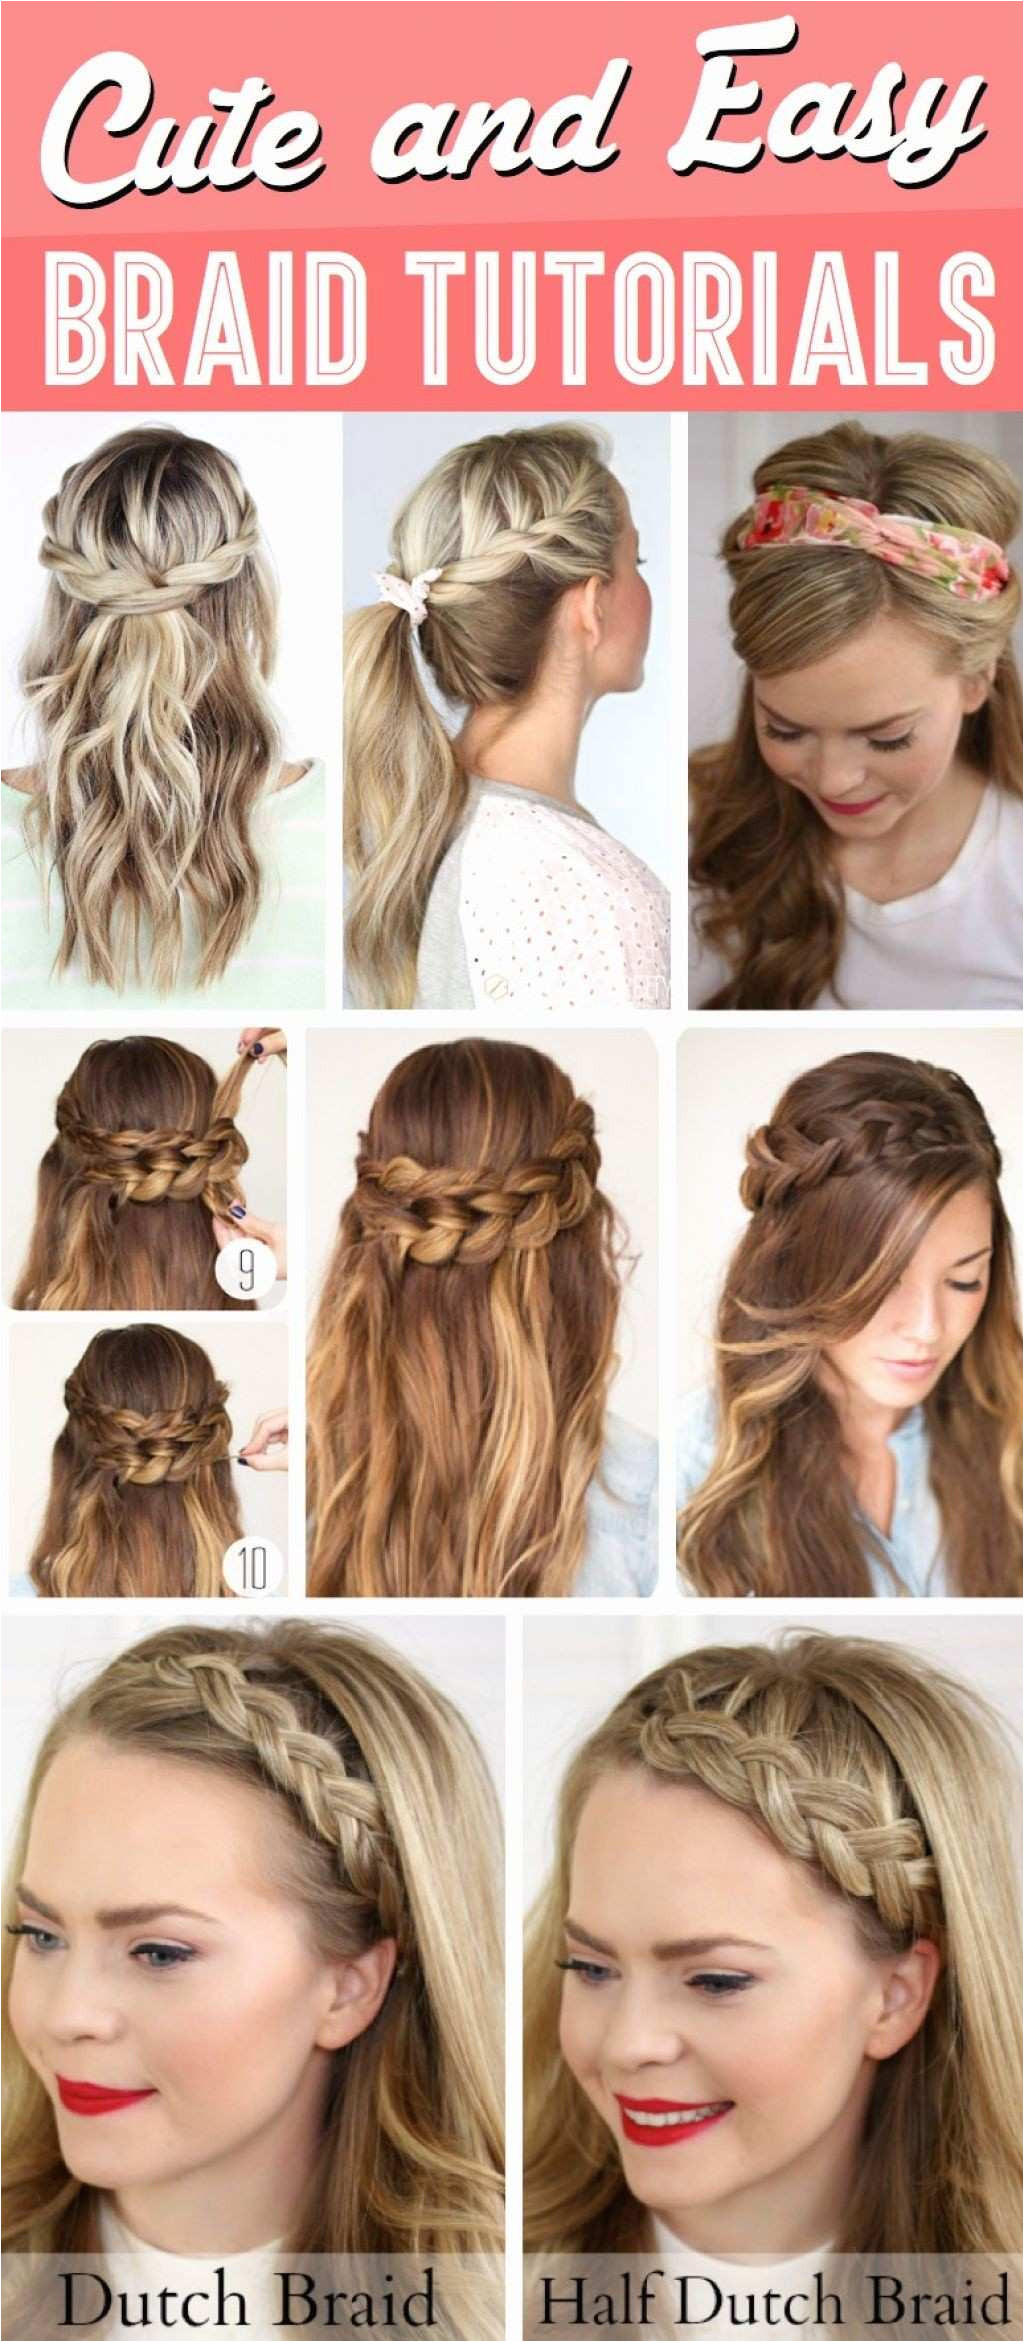 Cool Hairstyles For School For Girls Awesome Cute Easy Hairstyles For School Pics 5 Quick And